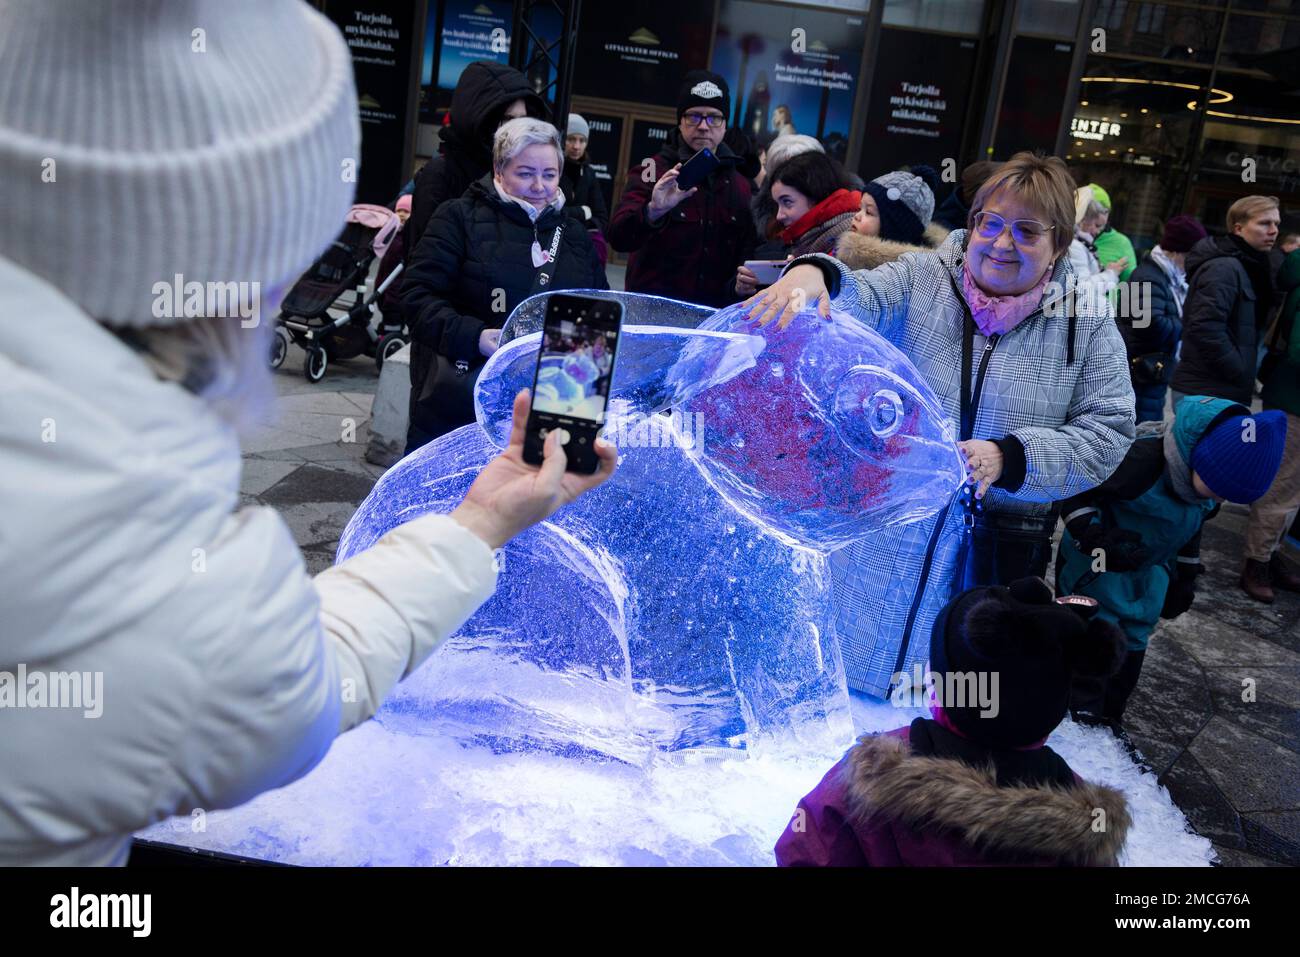 Helsinki, Finland. 21st Jan, 2023. A woman poses for photo with a rabbit-themed ice sculpture made in celebration of the Chinese New Year in Helsinki, Finland, Jan. 21, 2023. Credit: Matti Matikainen/Xinhua/Alamy Live News Stock Photo